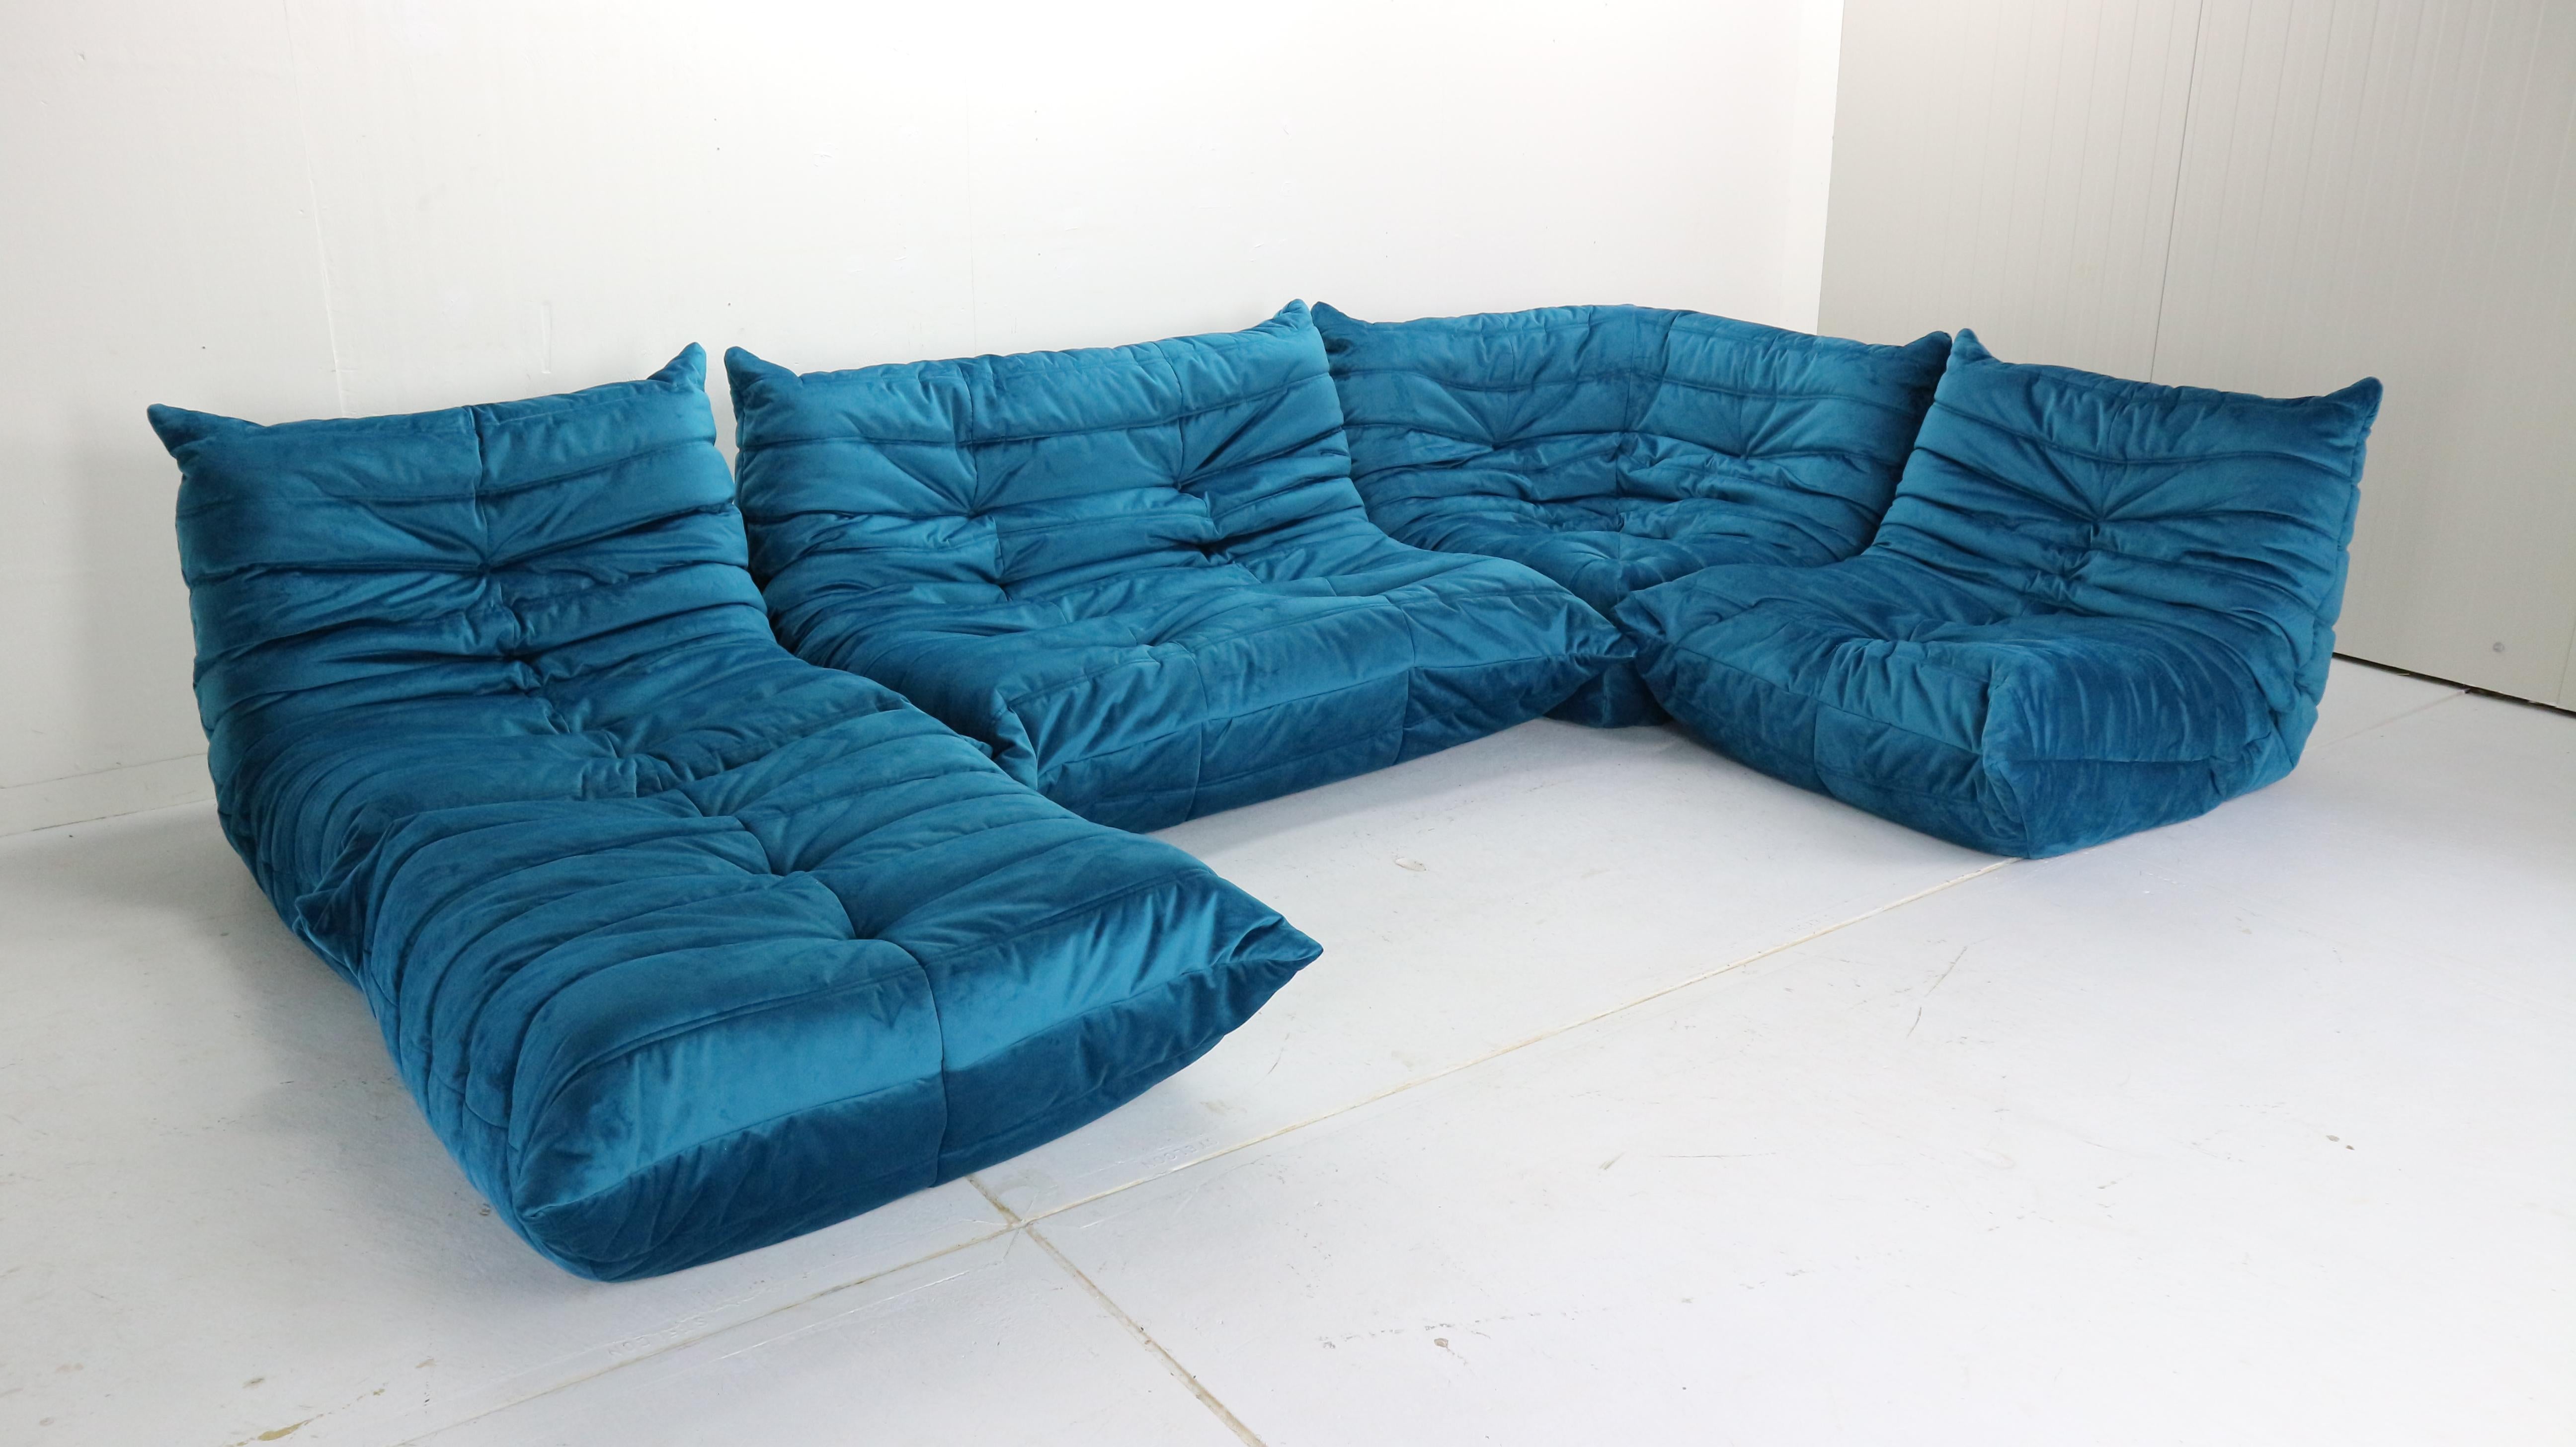 Magnificent Togo living room set was designed by Michel Ducaroy in 1973 and was manufactured by Ligne Roset in France.
Very comfortable and beautiful accent to your living room space.
It has been reupholstered in a blue soft velvet fabric.
The